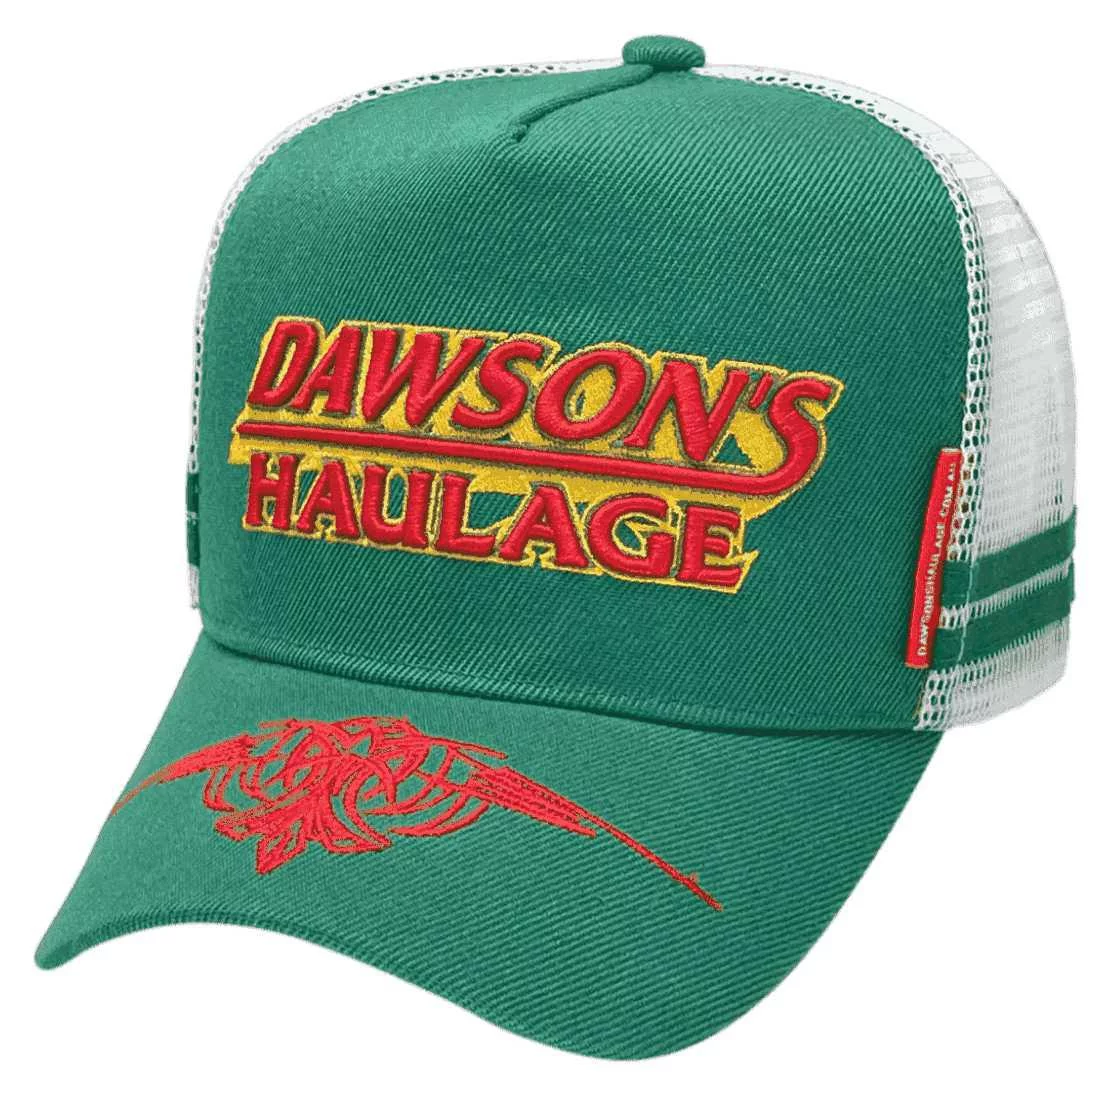 Dawson's Haulage Baranduda Vic HP Power Aussie Trucker Hat with Australian Head Fit Crown and Double Side Bands Green White